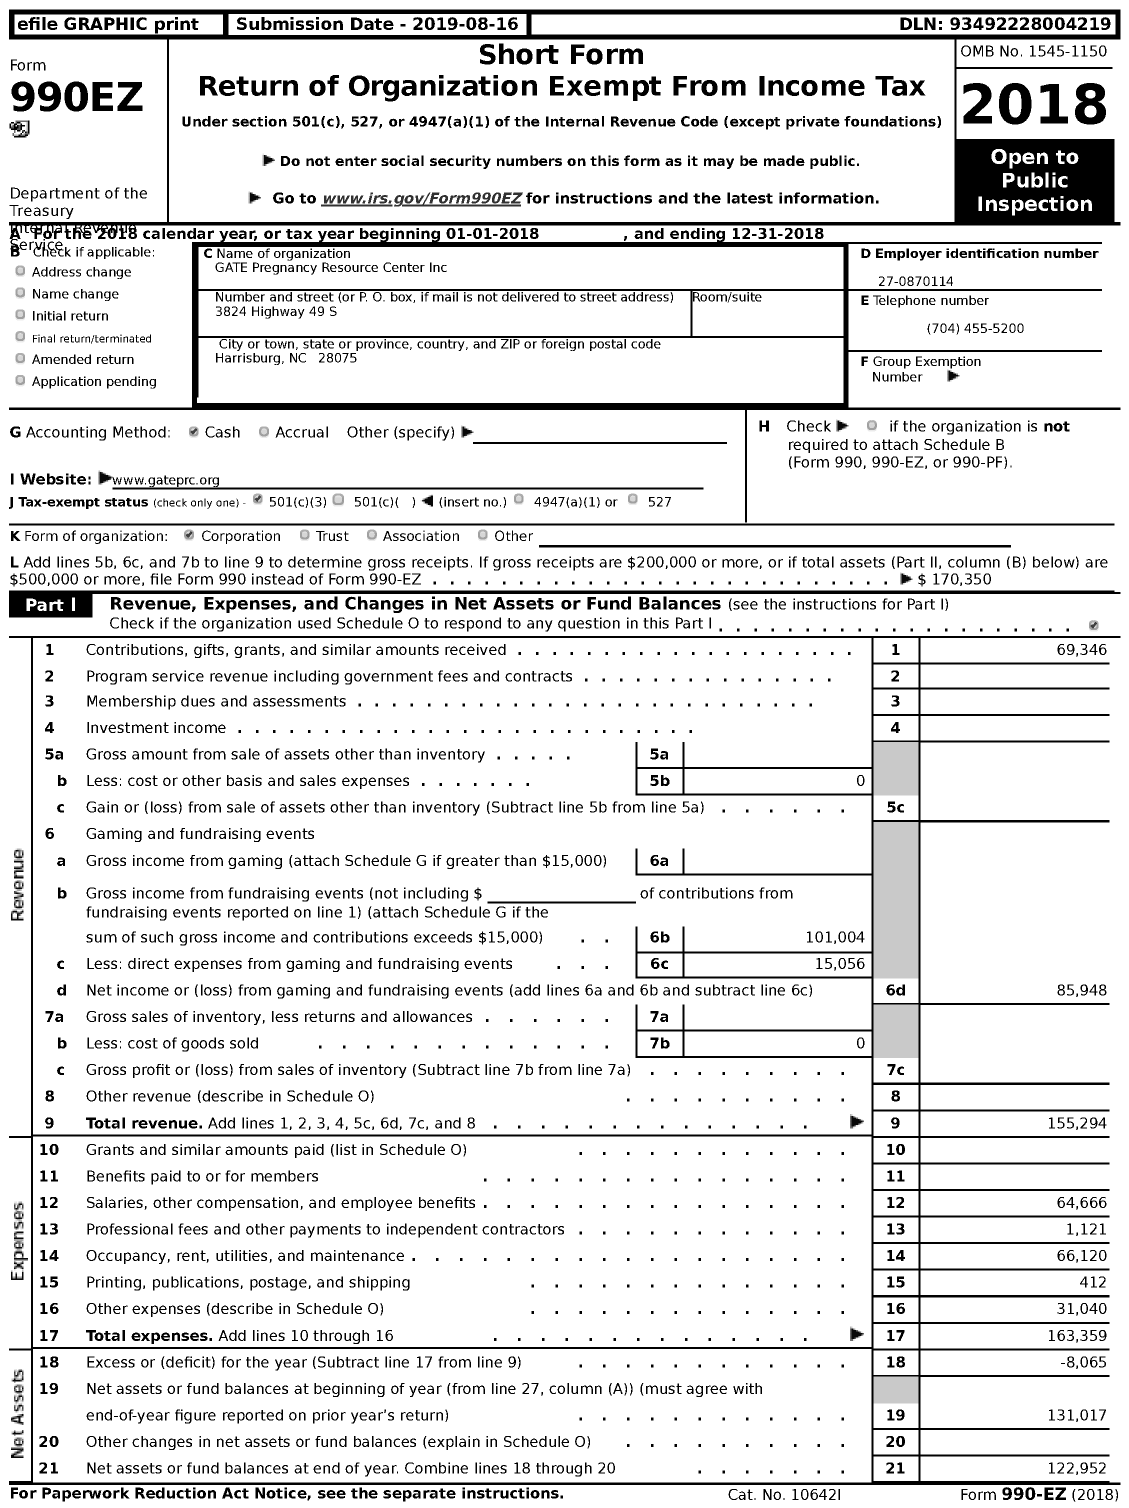 Image of first page of 2018 Form 990EZ for Gate Pregnancy Resource Center